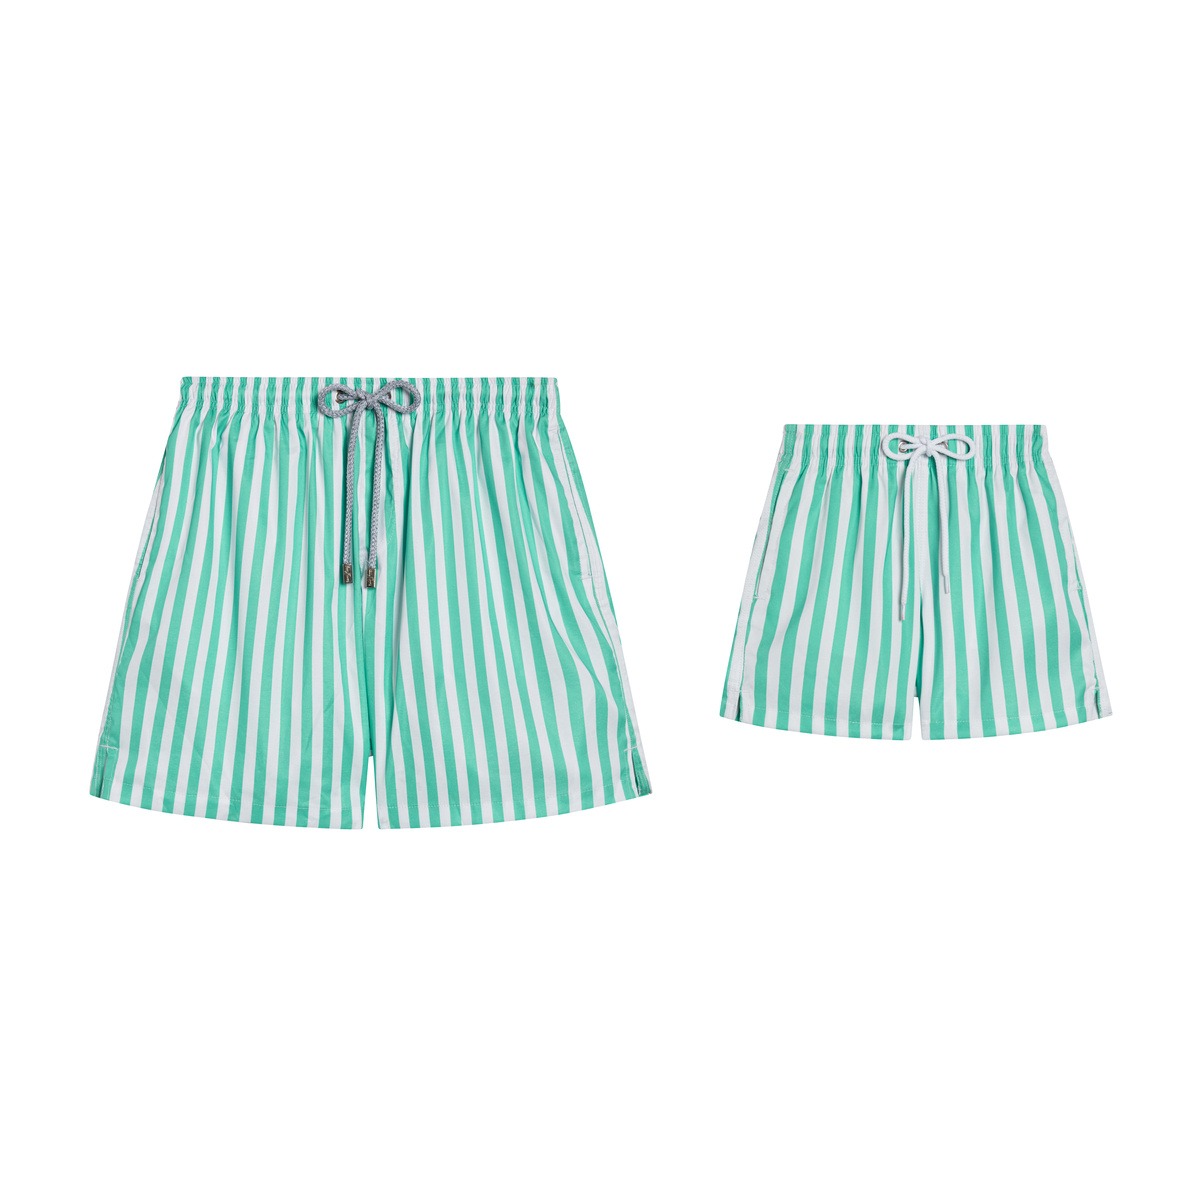 Women green color stripped shorts